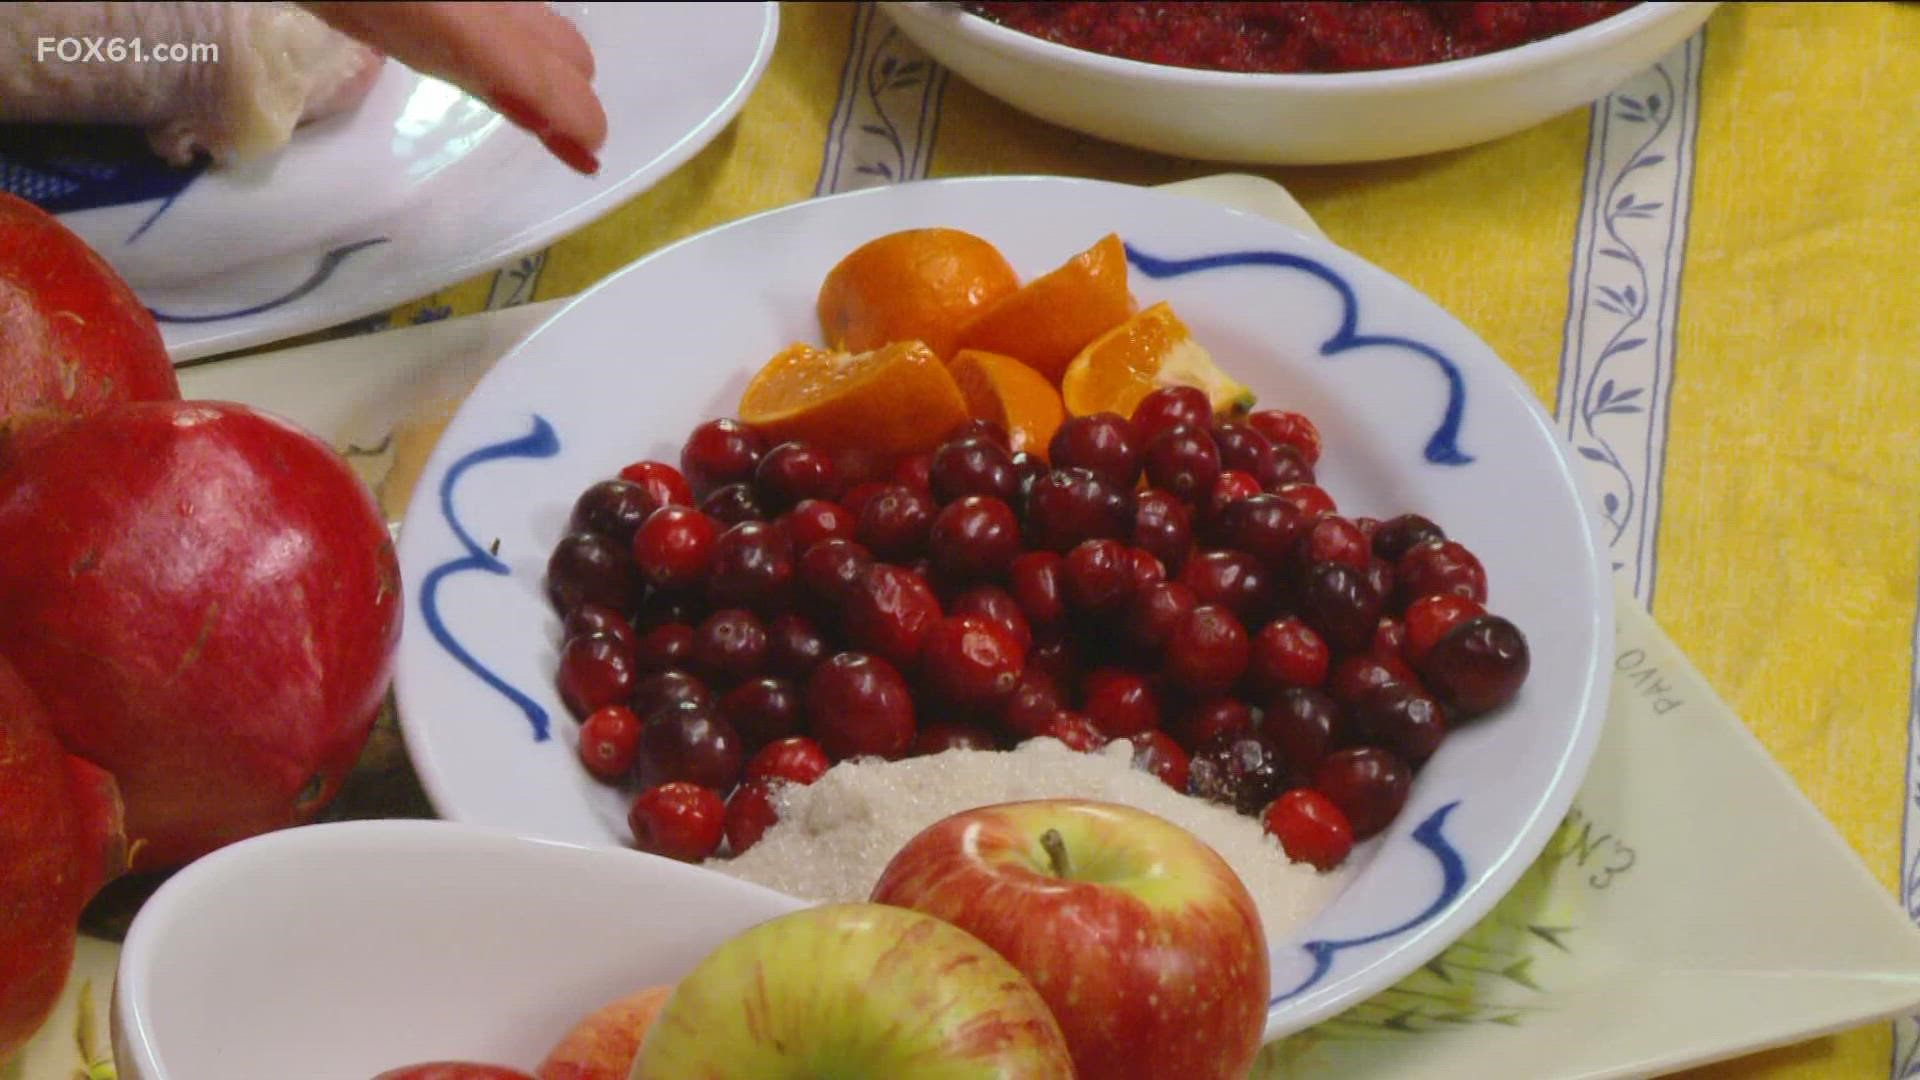 Chef Ani Robaina shows us how to make a delicious turkey brine and a fresh cranberry and orange relish, a perfect addition to your holiday meal!